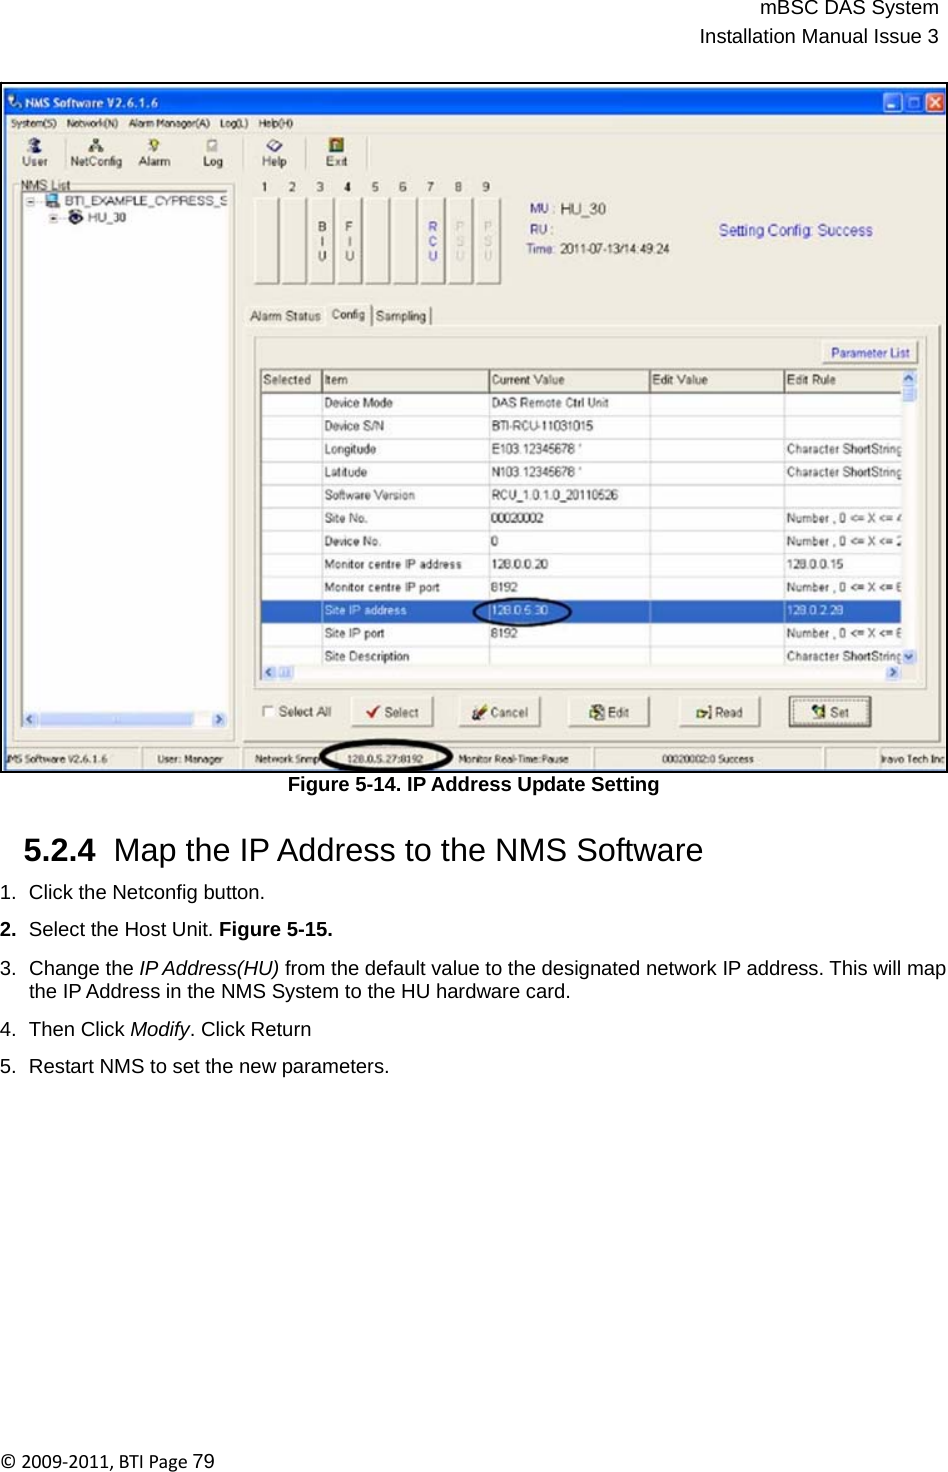 mBSC DAS SystemInstallation Manual Issue 3©2009‐2011,BTIPage79                                    Figure 5-14. IP Address Update Setting   5.2.4  Map the IP Address to the NMS Software  1.  Click the Netconfig button.  2.  Select the Host Unit. Figure 5-15.  3.  Change the IP Address(HU) from the default value to the designated network IP address. This will map the IP Address in the NMS System to the HU hardware card.  4.  Then Click Modify. Click Return  5.  Restart NMS to set the new parameters. 